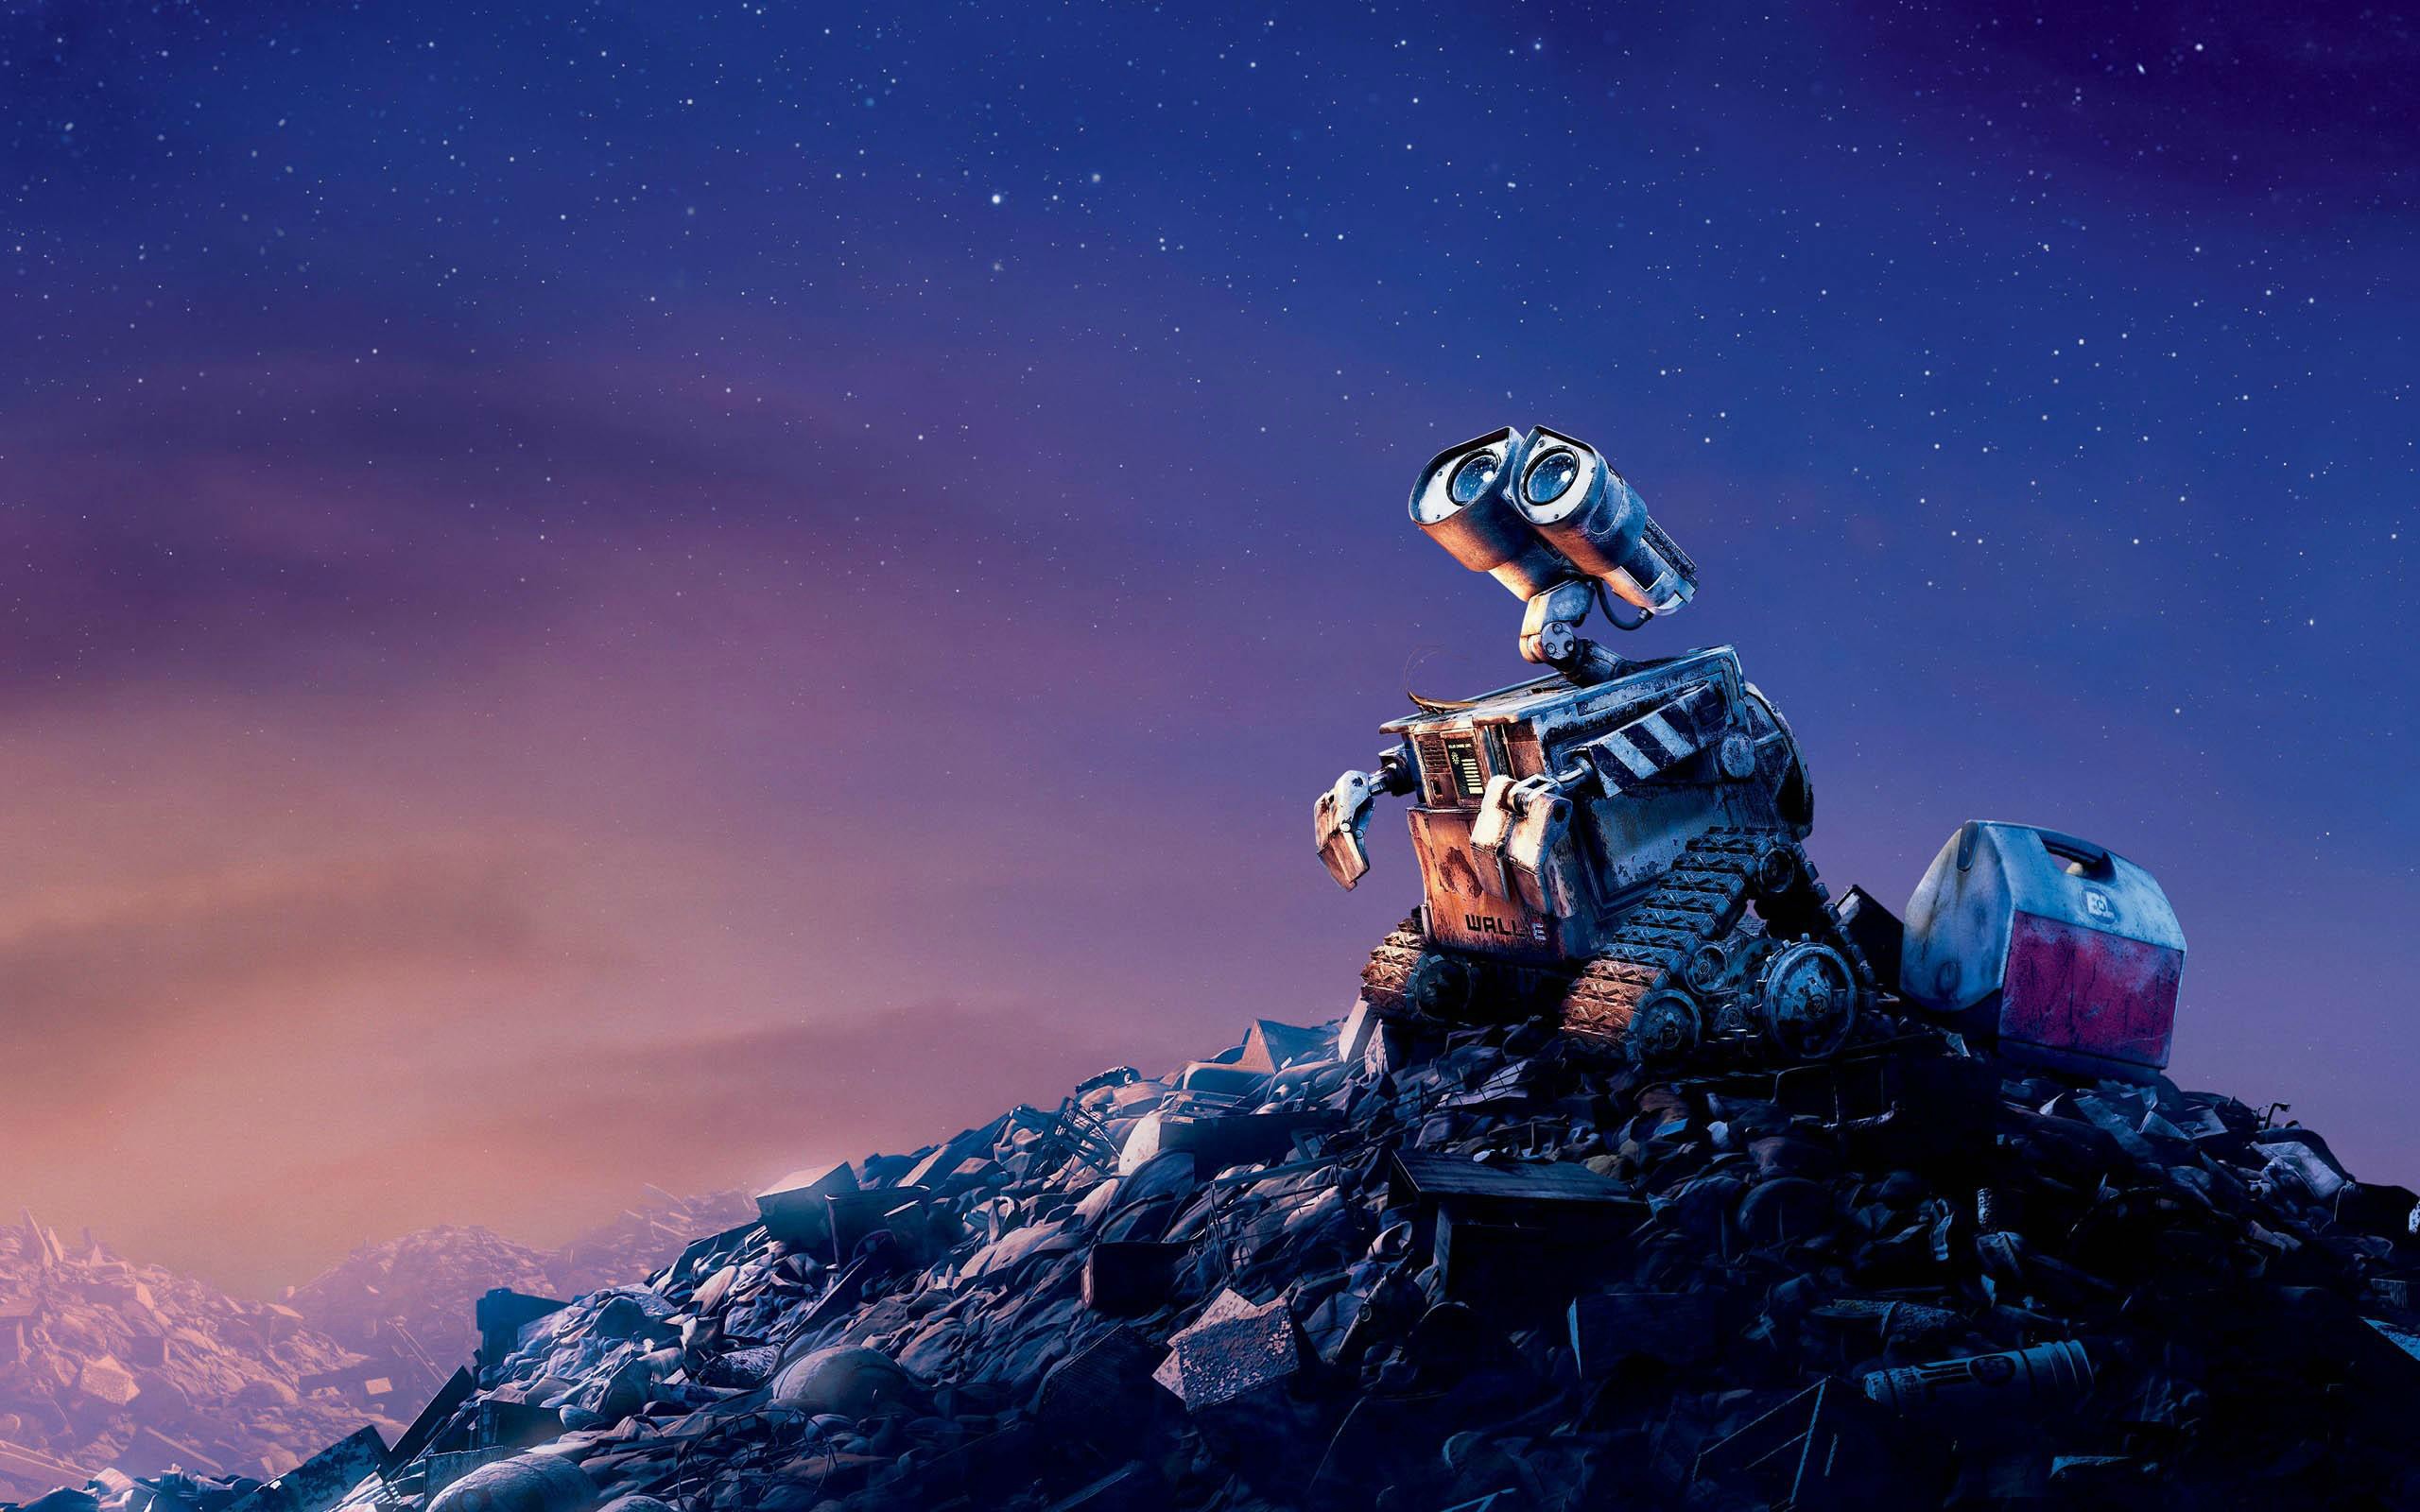 Download High quality WALL-E wallpaper / Movies / 2560x1600